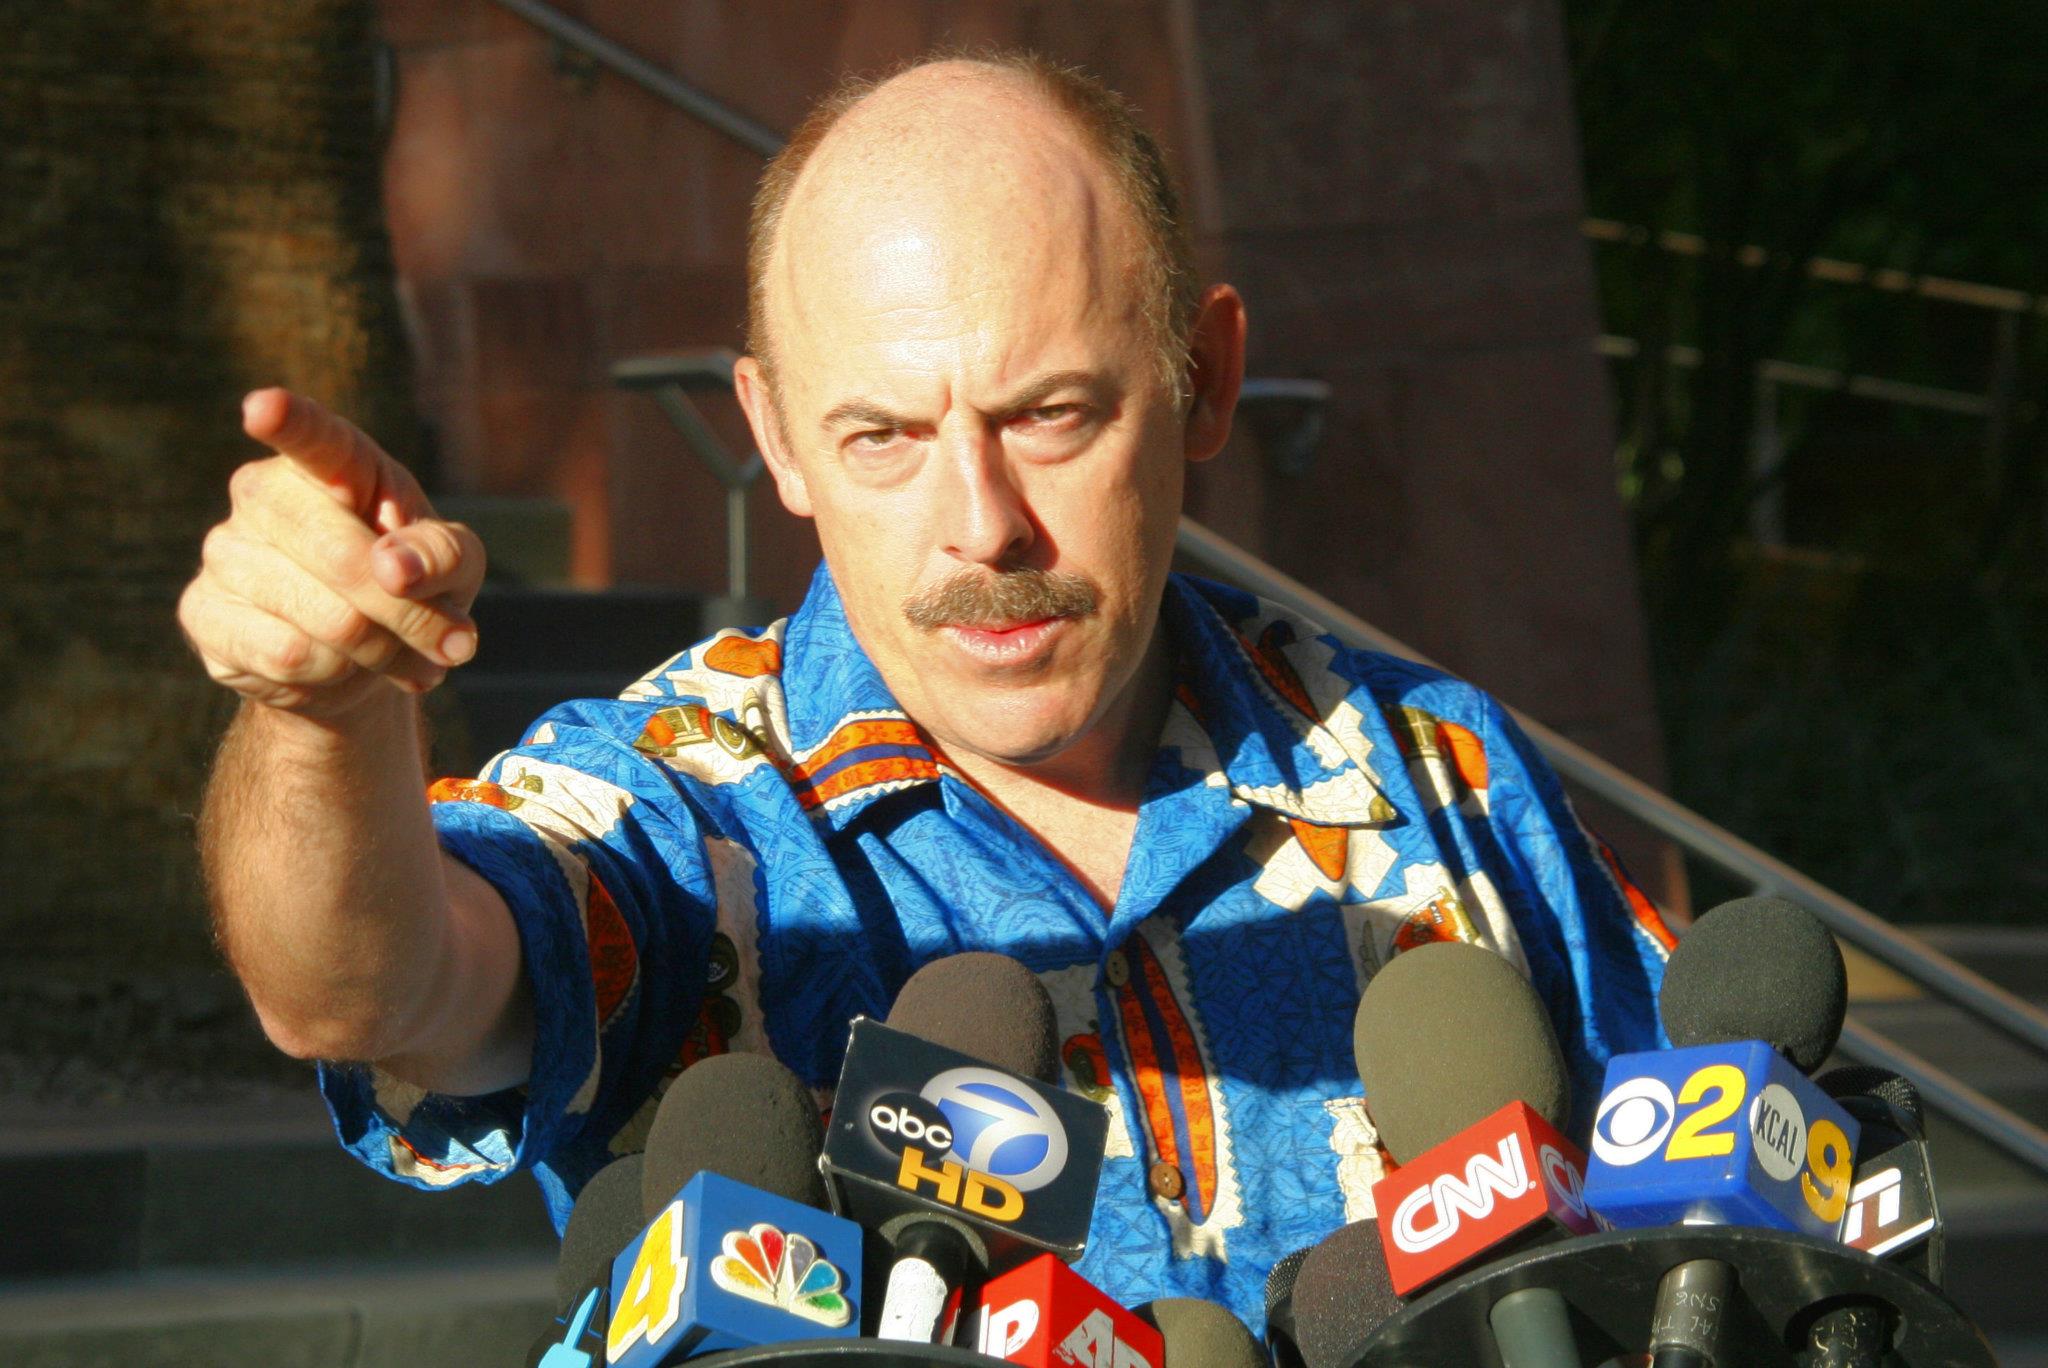 Glenn takes questions from the press outside an arraignment hearing for OJ Simpson in Las Vegas, 2007